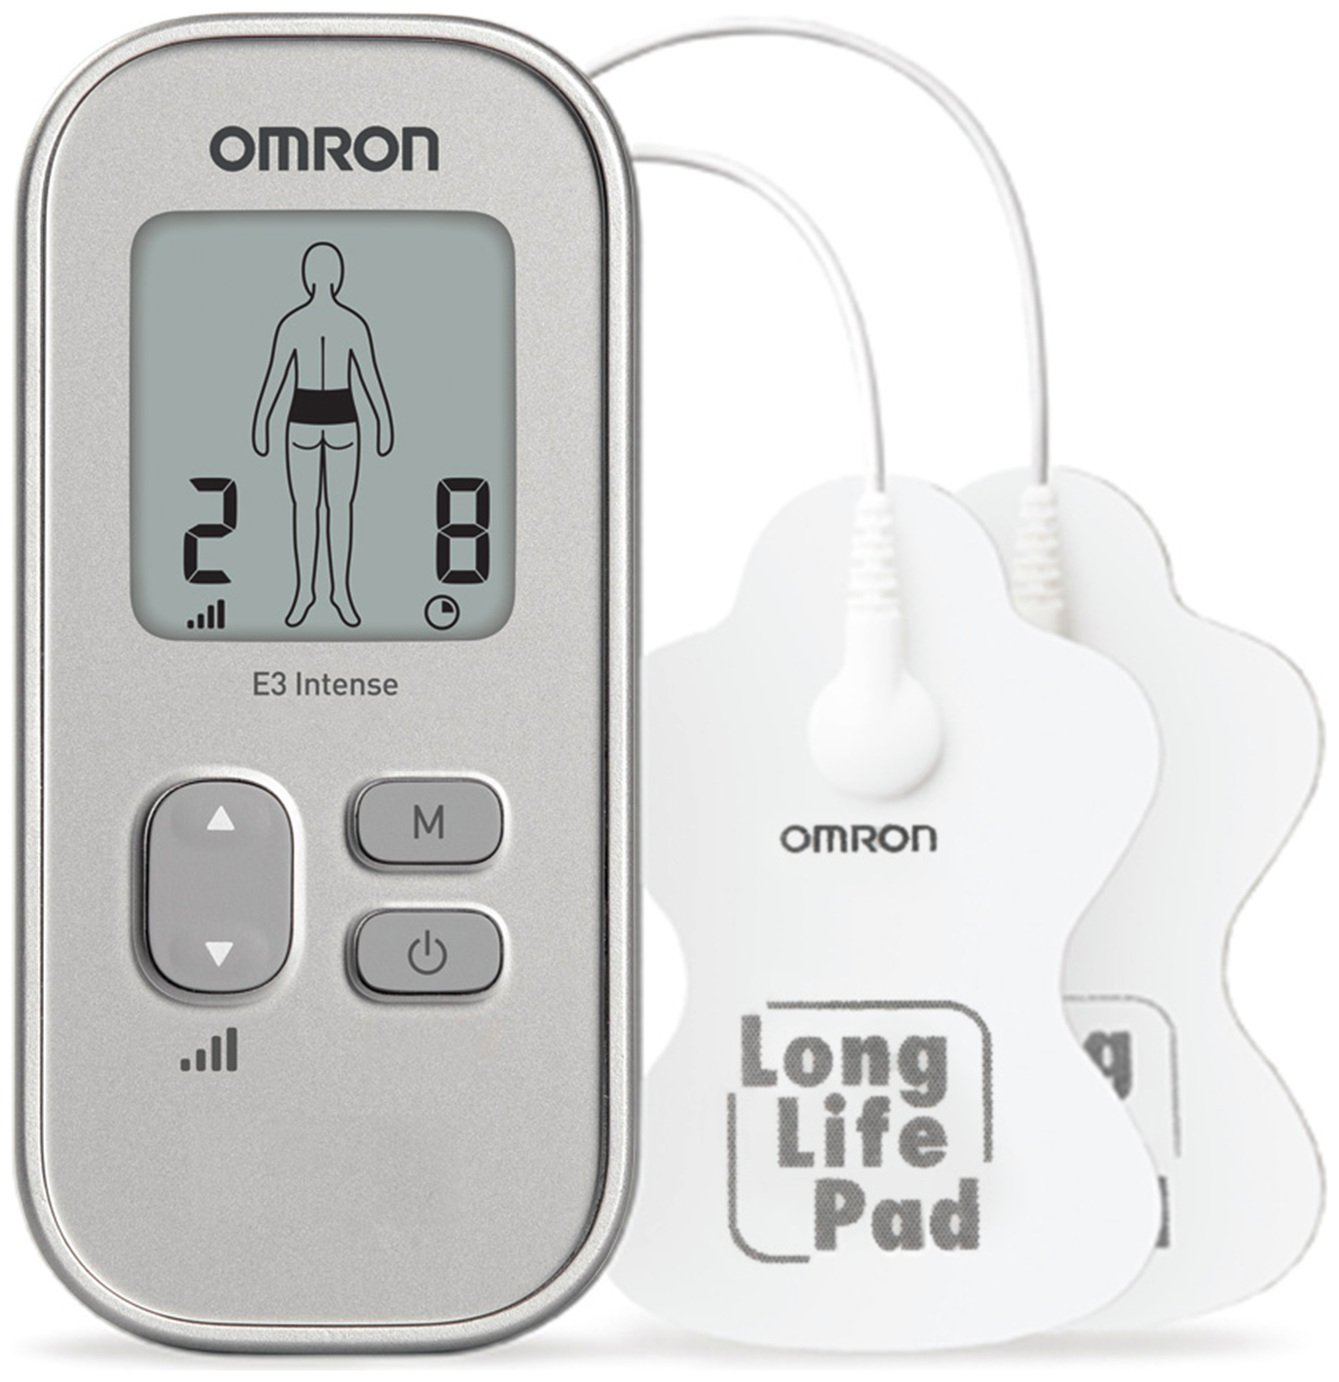 Omron E3 Intense Pain Management Tens Machine Review